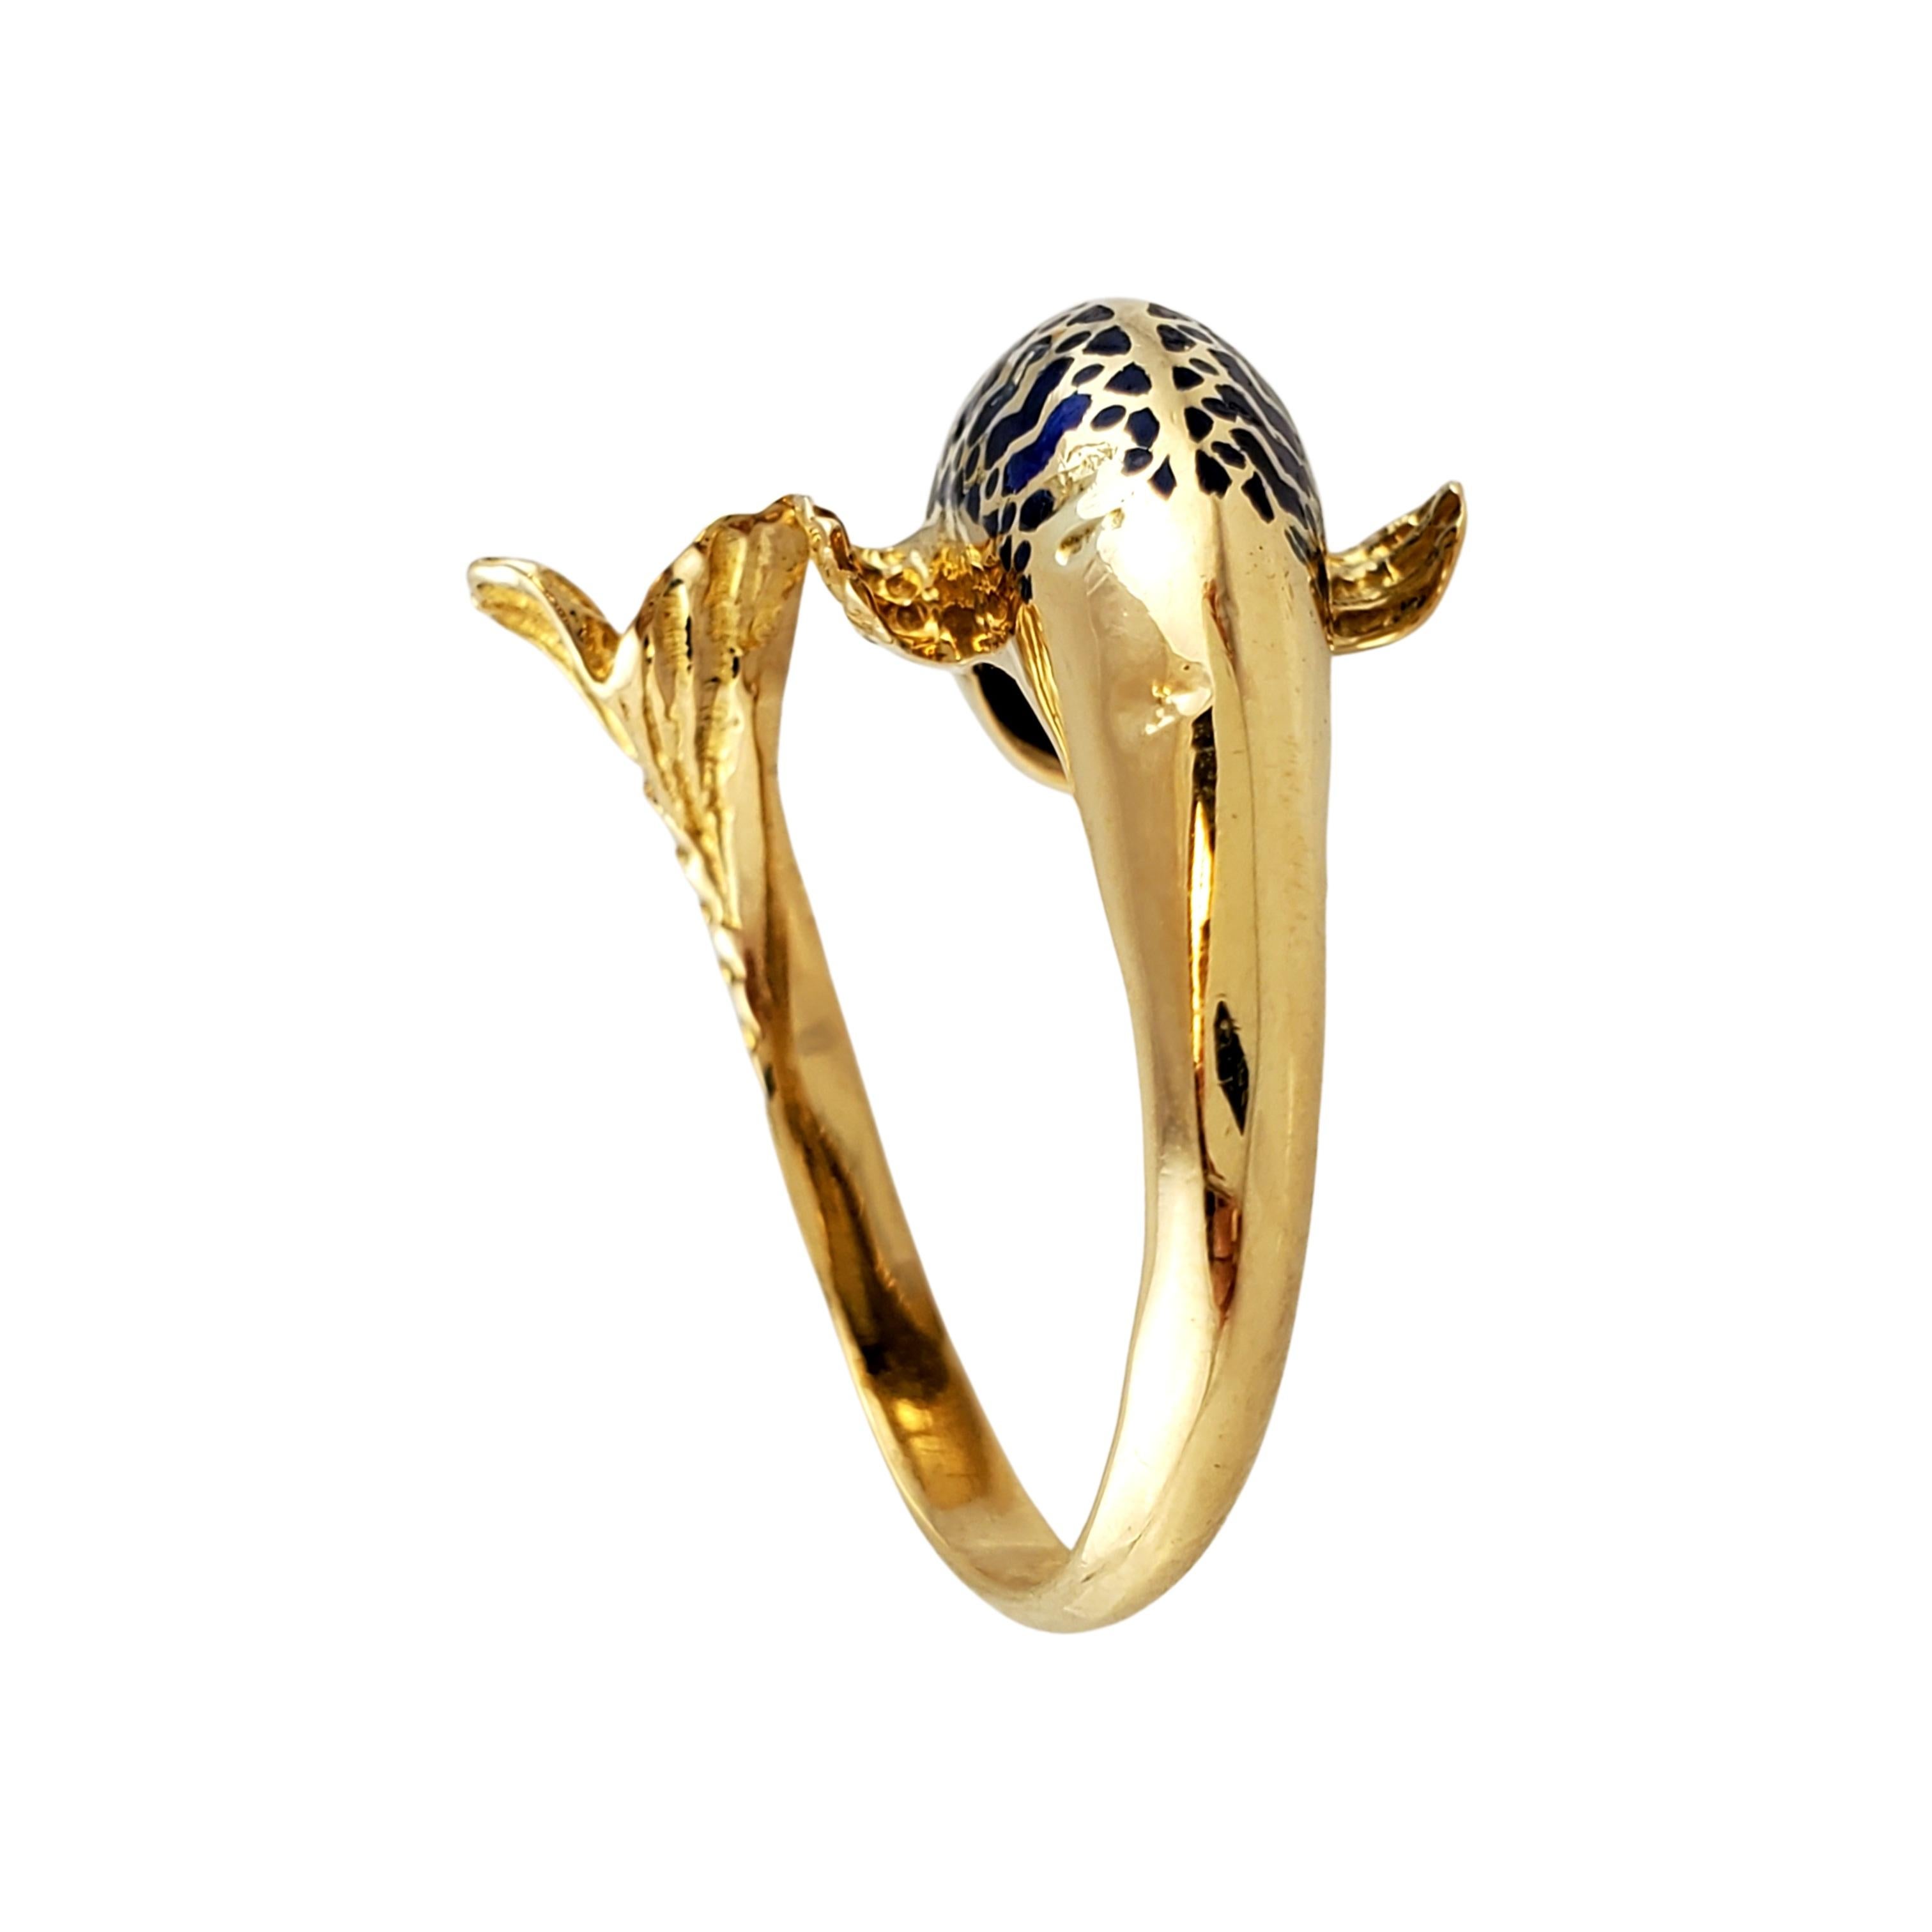 Vintage 18K Yellow Gold Enamel Fish Ring Size 7

Beautiful 3D 18k yellow gold enamel fish ring features blue and green enamel in excellent condition that gives this ring life like fish detailing. This is a very unique piece that can be a show